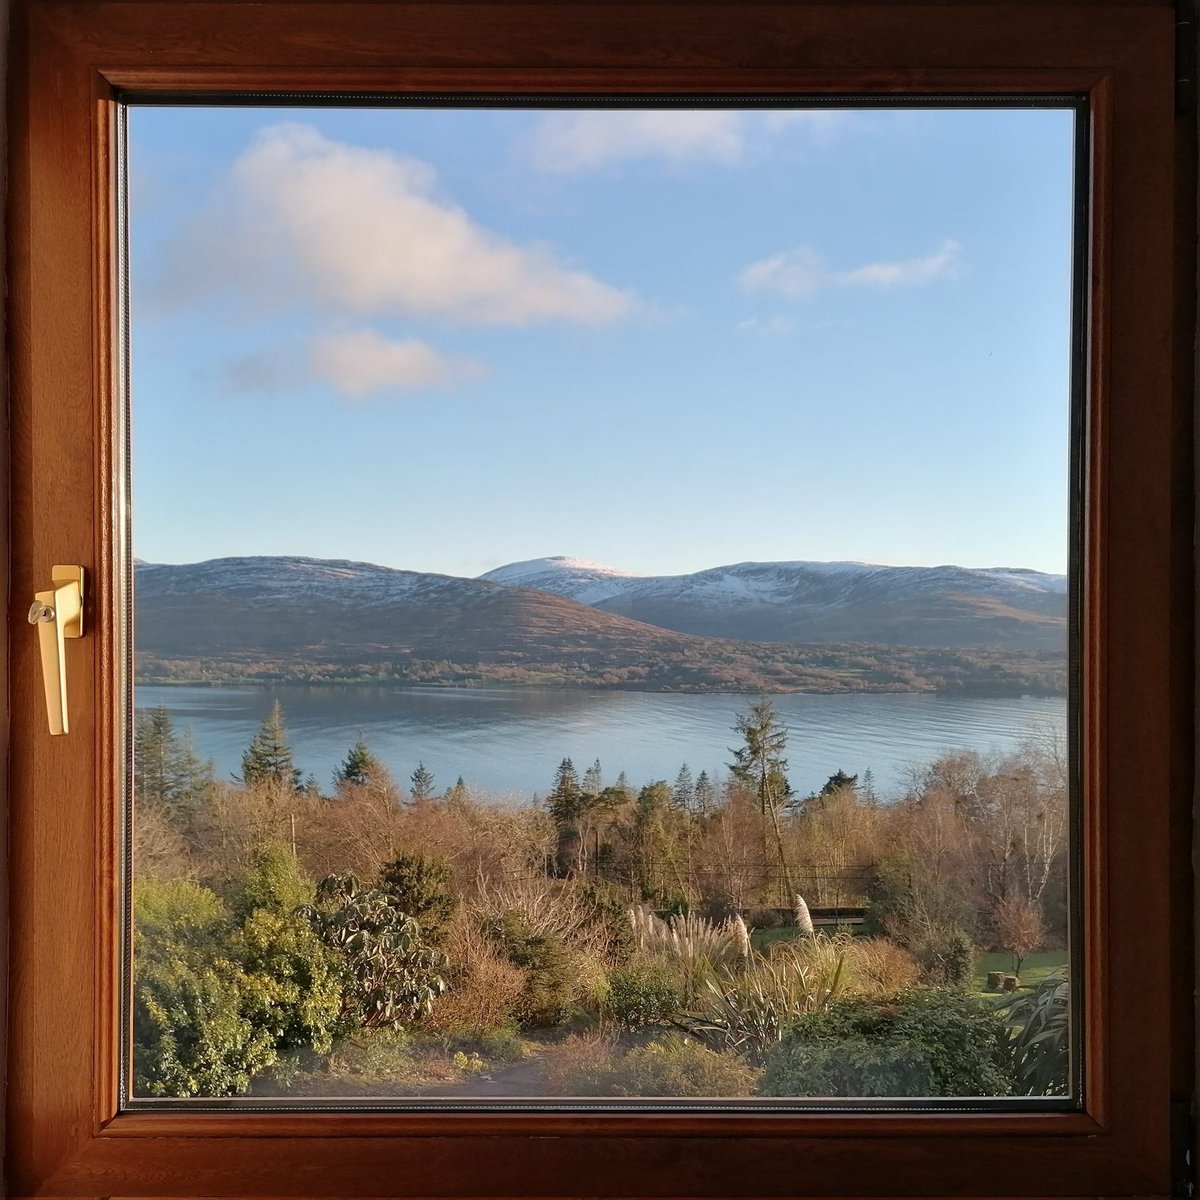 Room with a view to Kenmare Bay and snowcapped mountains. #valhallabnb #bedandbreakfast #roomwithaview #kerry #kenmare #ireland #view #kenmarebay #ringofkerry #wildatlanticway